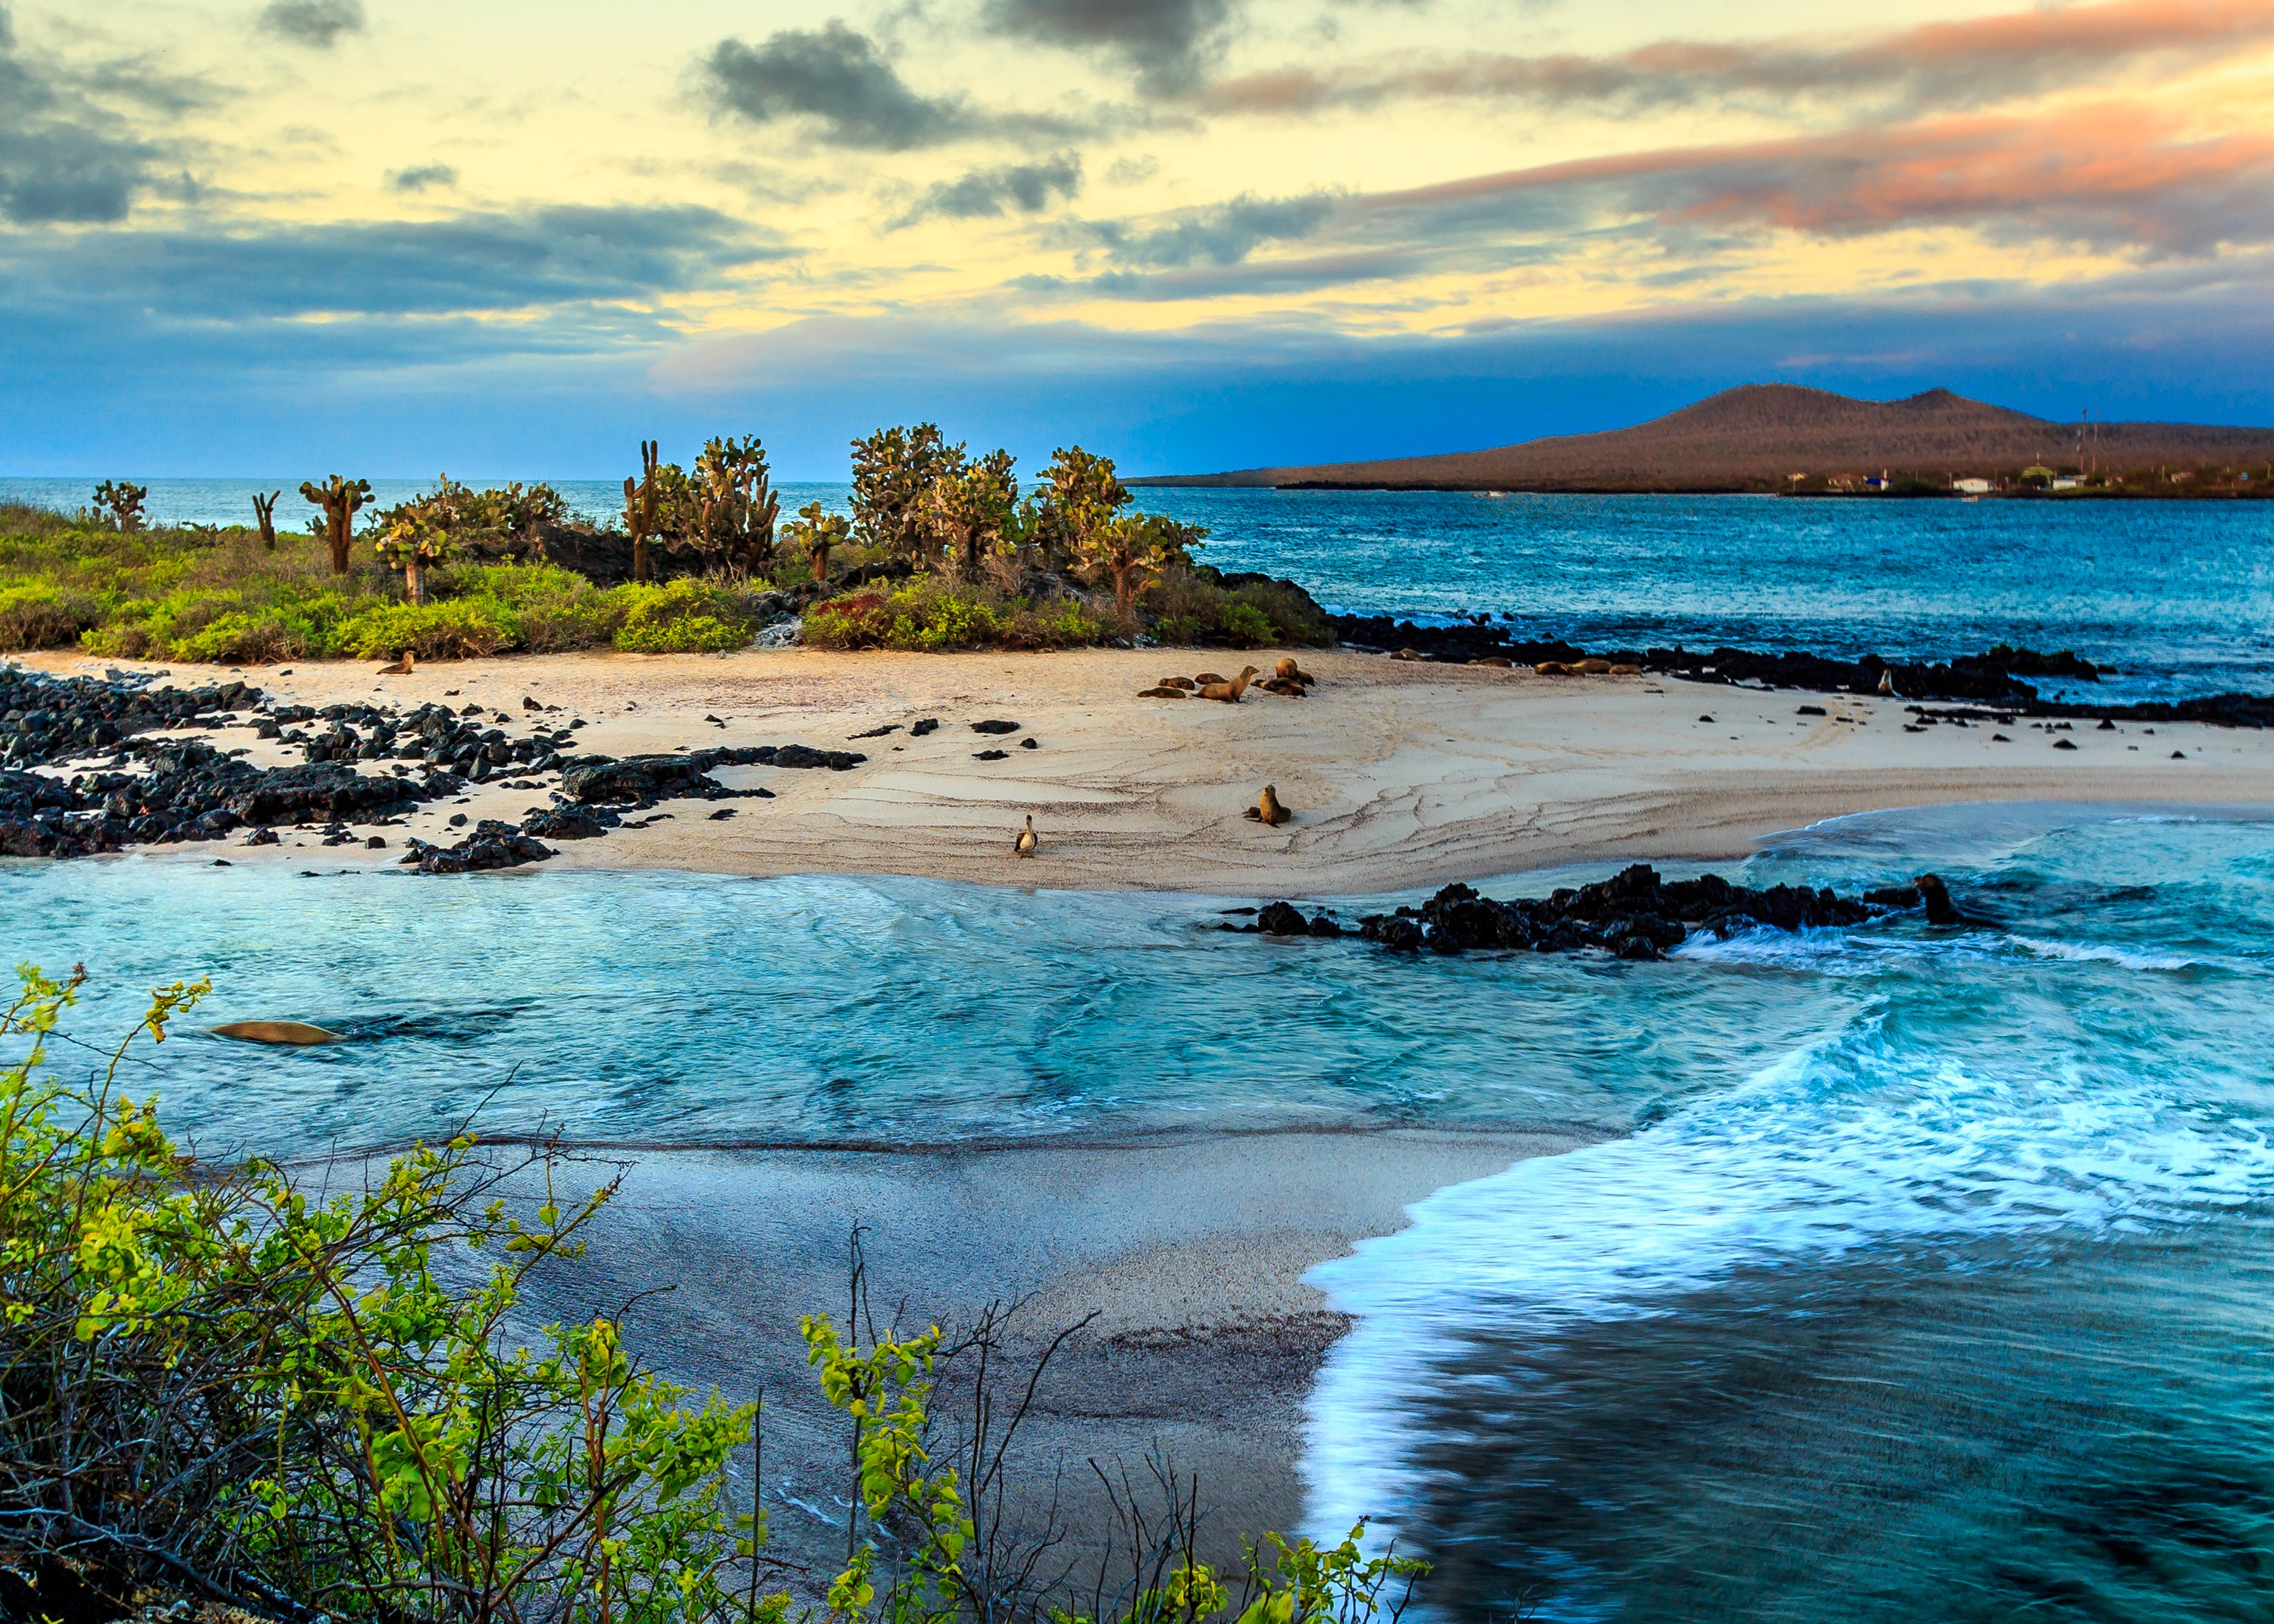 Classic Journeys’ 8-day <a href="https://www.classicjourneys.com/trip/galapagos/">land-based multisport itinerary</a> brings you closer to the <a href="https://www.cntraveler.com/story/why-you-shouldnt-put-off-a-cruise-to-the-galapagos-islands?mbid=synd_msn_rss&utm_source=msn&utm_medium=syndication">Ecuadorian islands’</a> unique wildlife (marine iguanas, warm-water penguins, blue-footed boobies) than most liveaboards. After swimming and kayaking alongside sea lions and sea turtles, trek eight miles to the rim of Sierra Negra, one of the world’s most active volcanoes. Then head over to Santa Cruz Island, where you'll be greeted by 500-pound giant tortoises and manta rays swirling just below the water's surface.<p>Sign up to receive the latest news, expert tips, and inspiration on all things travel.</p><a href="https://www.cntraveler.com/newsletter/the-daily?sourceCode=msnsend">Inspire Me</a>